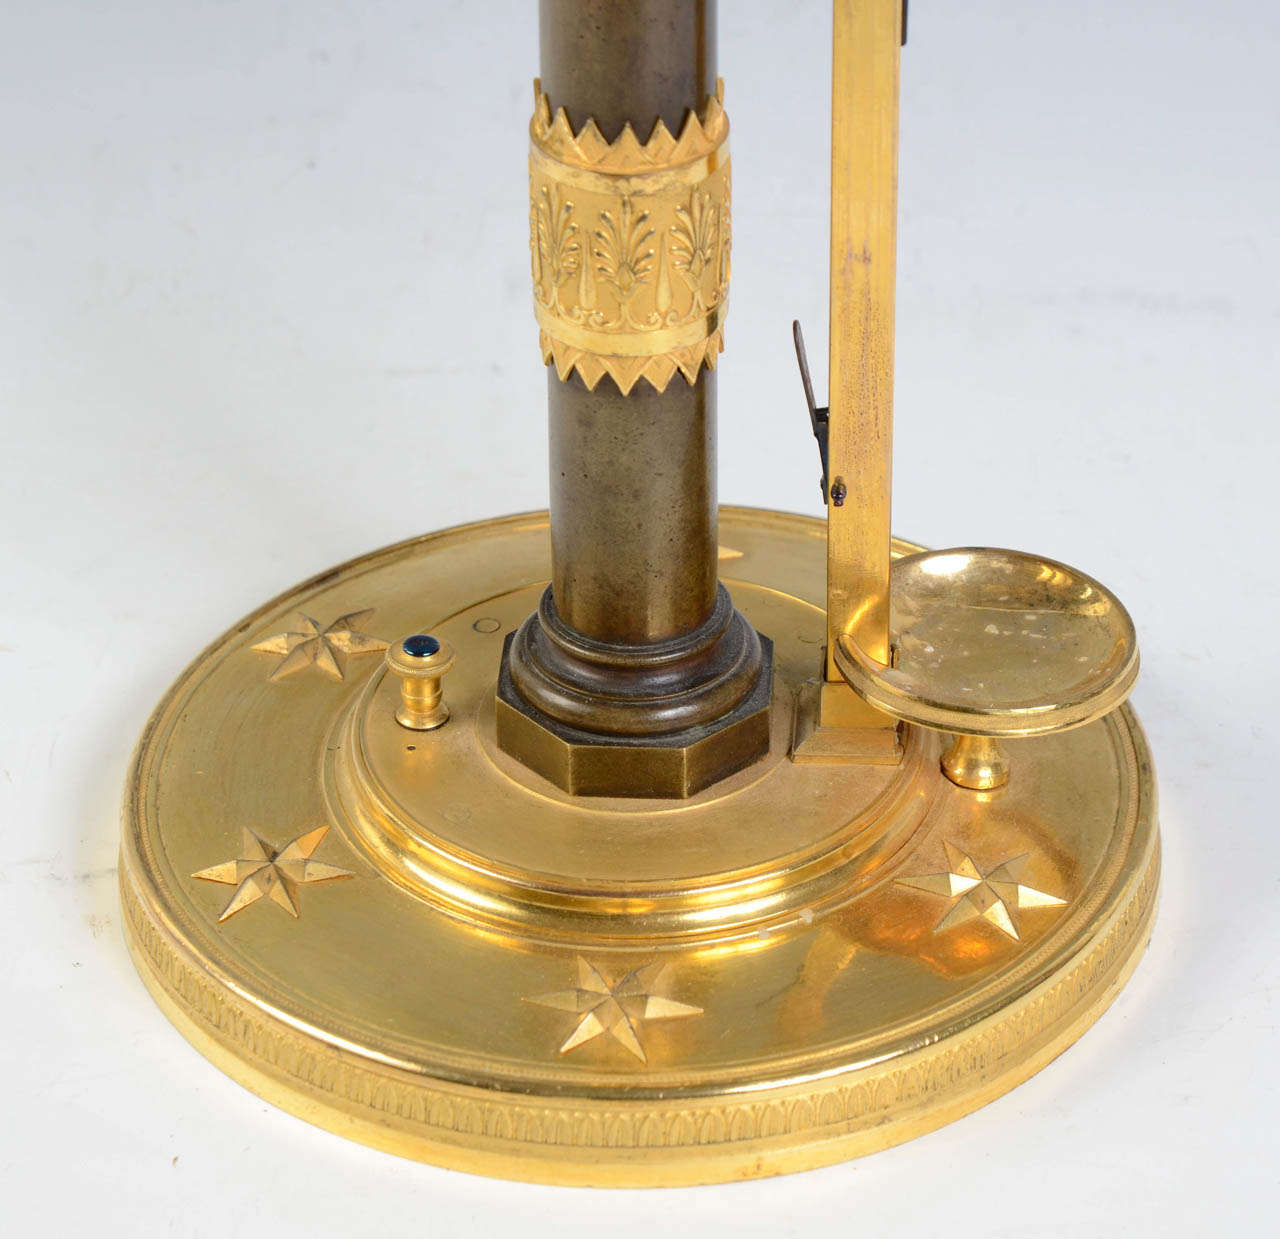 Empire A 19th Century Mechanical Candlestick Approved by The French National Institute